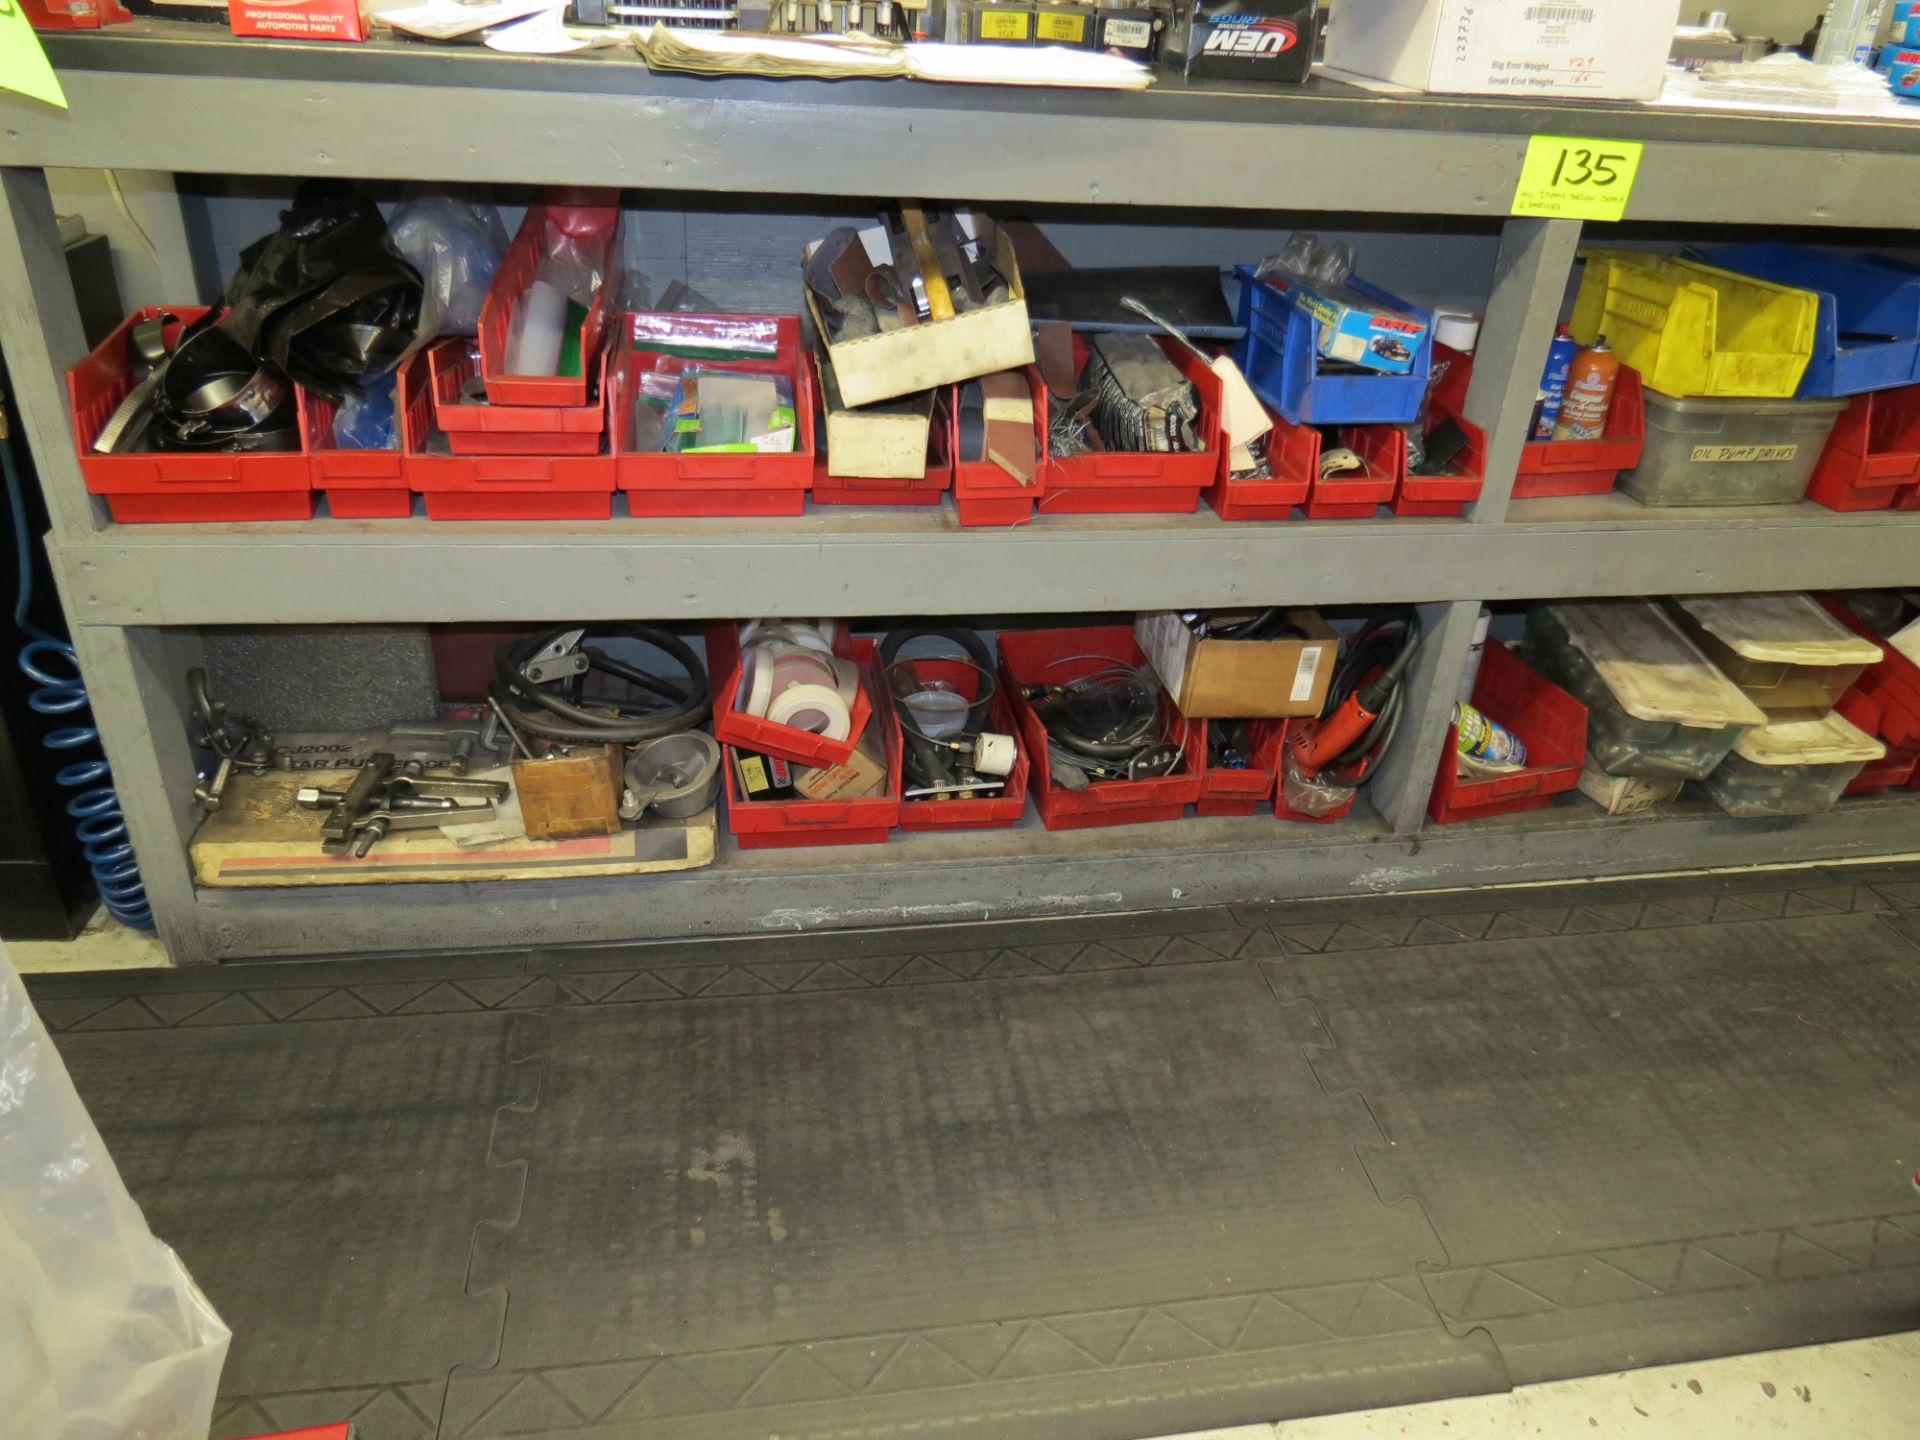 LOT OF ASSORTED TOOLS AND PARTS BELOW BENCH